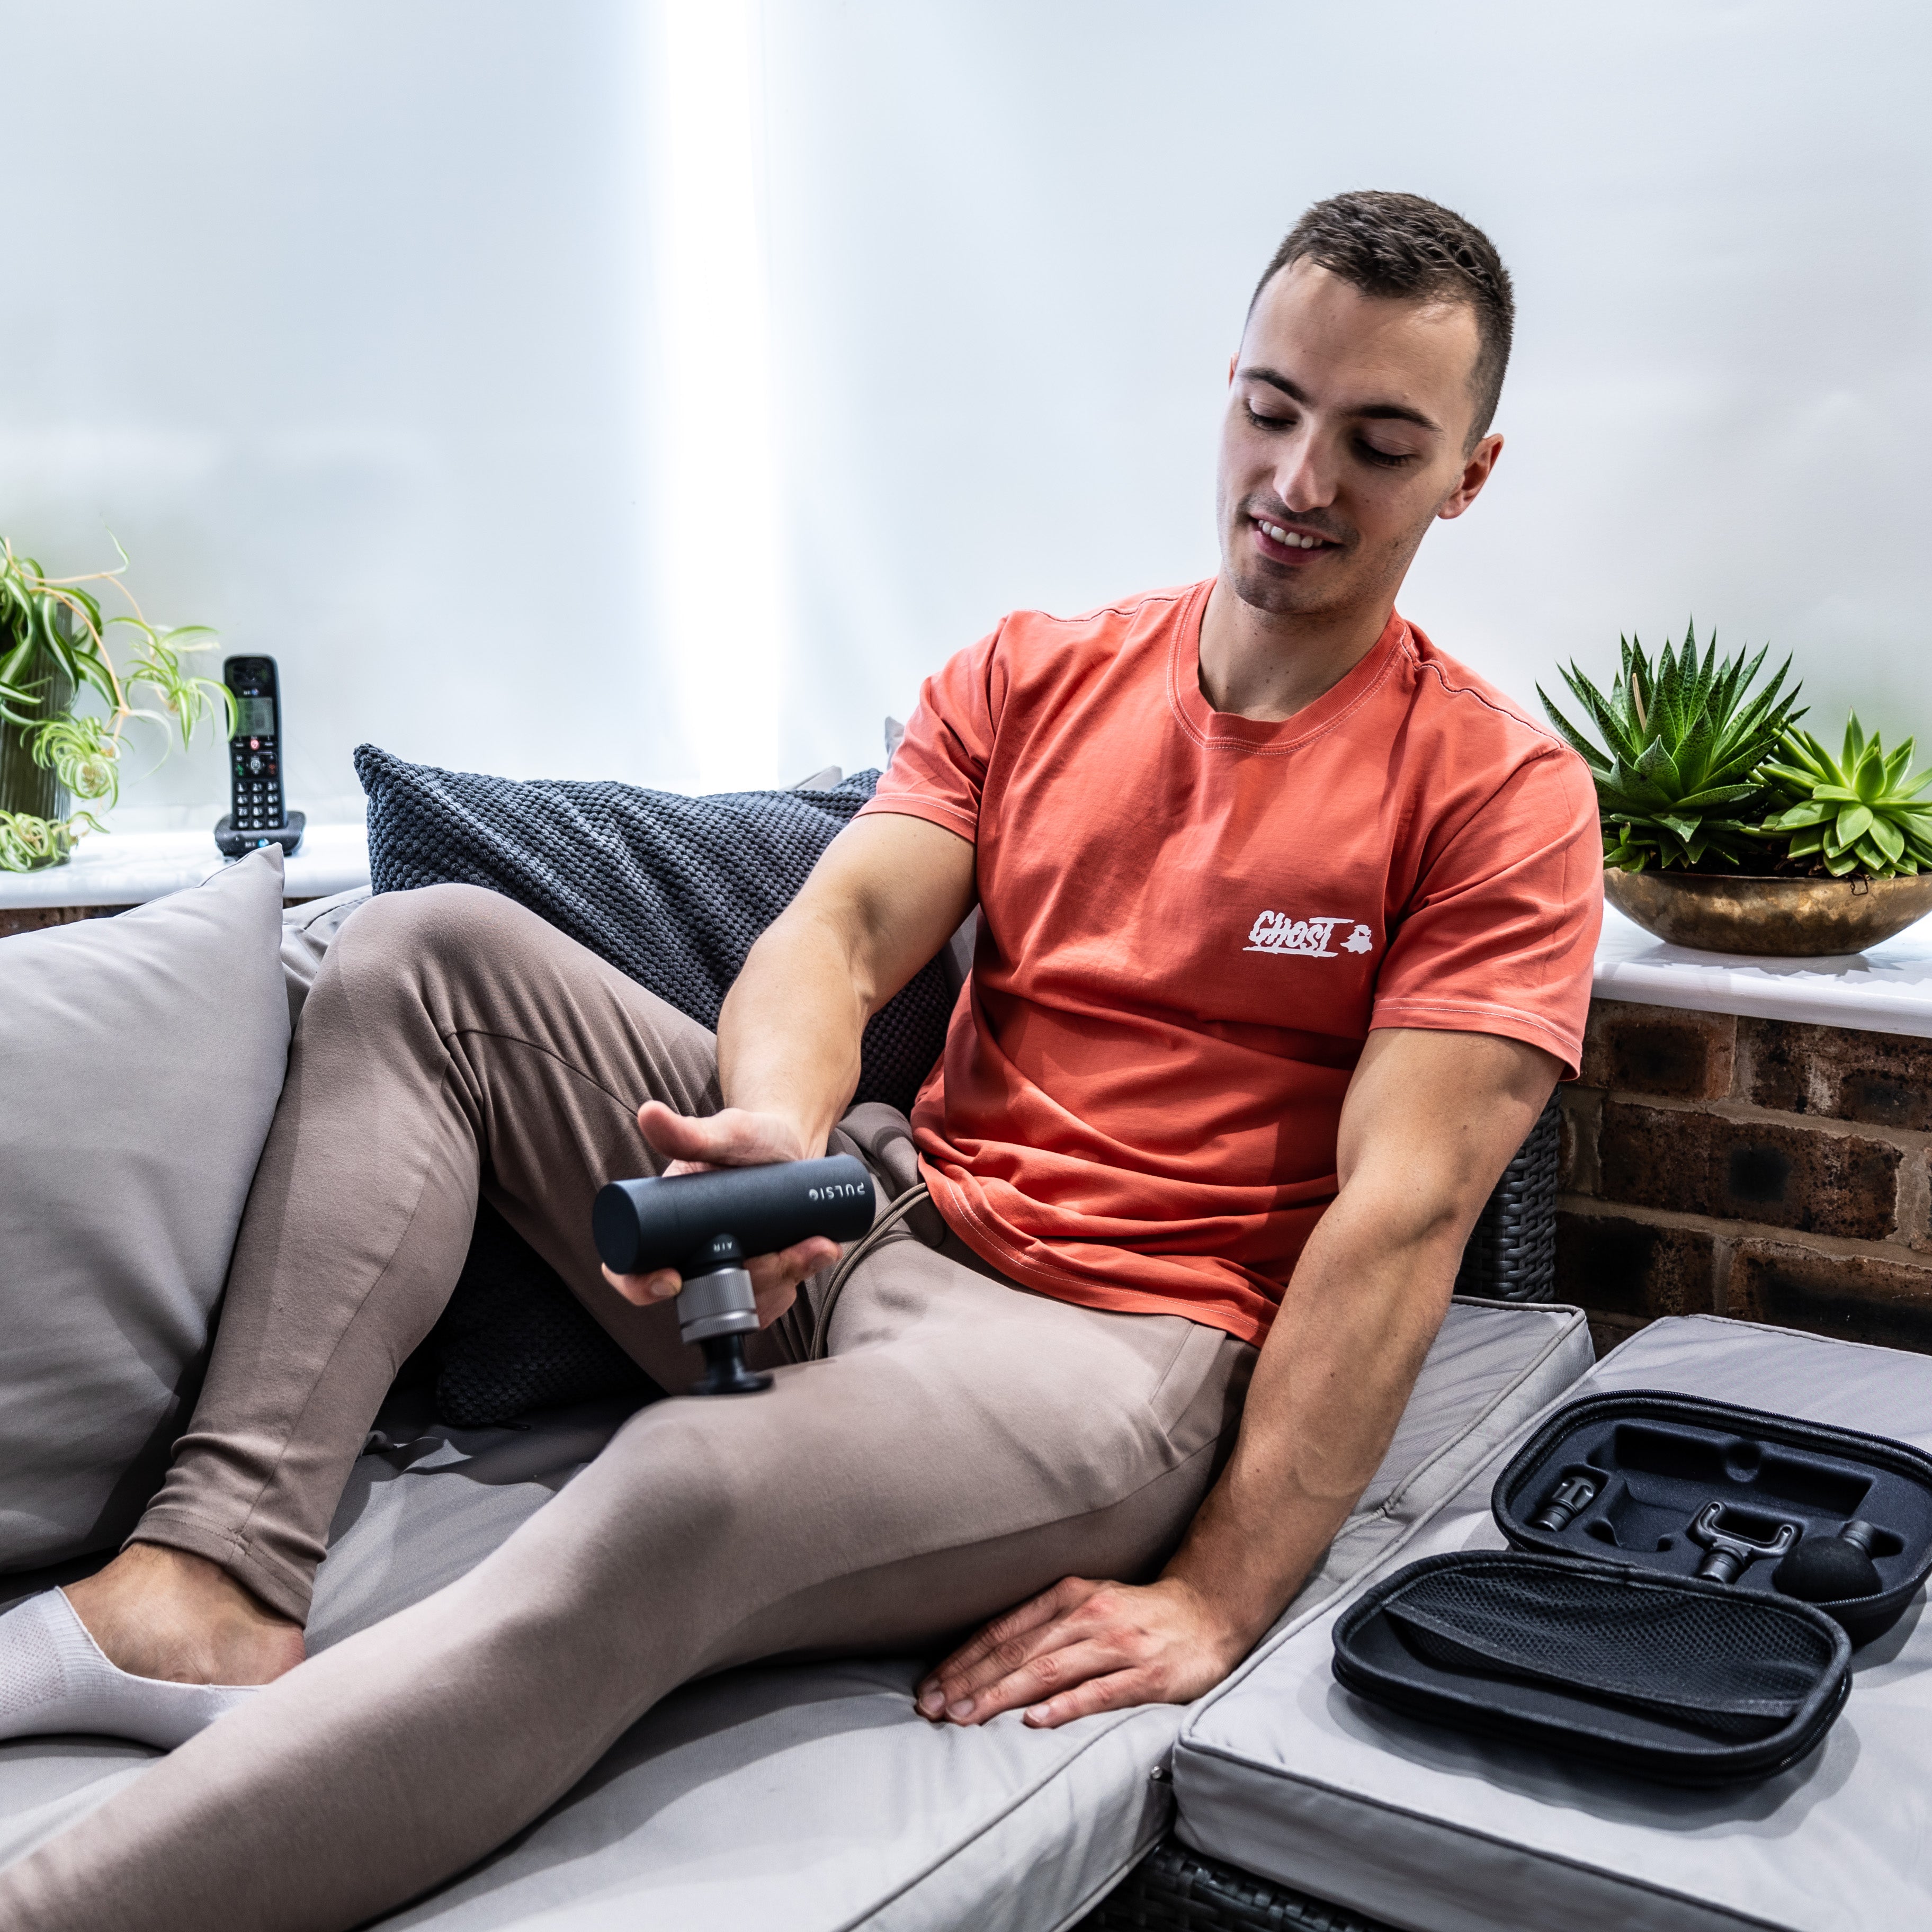 Man using a handheld massage device while sitting on a sofa.